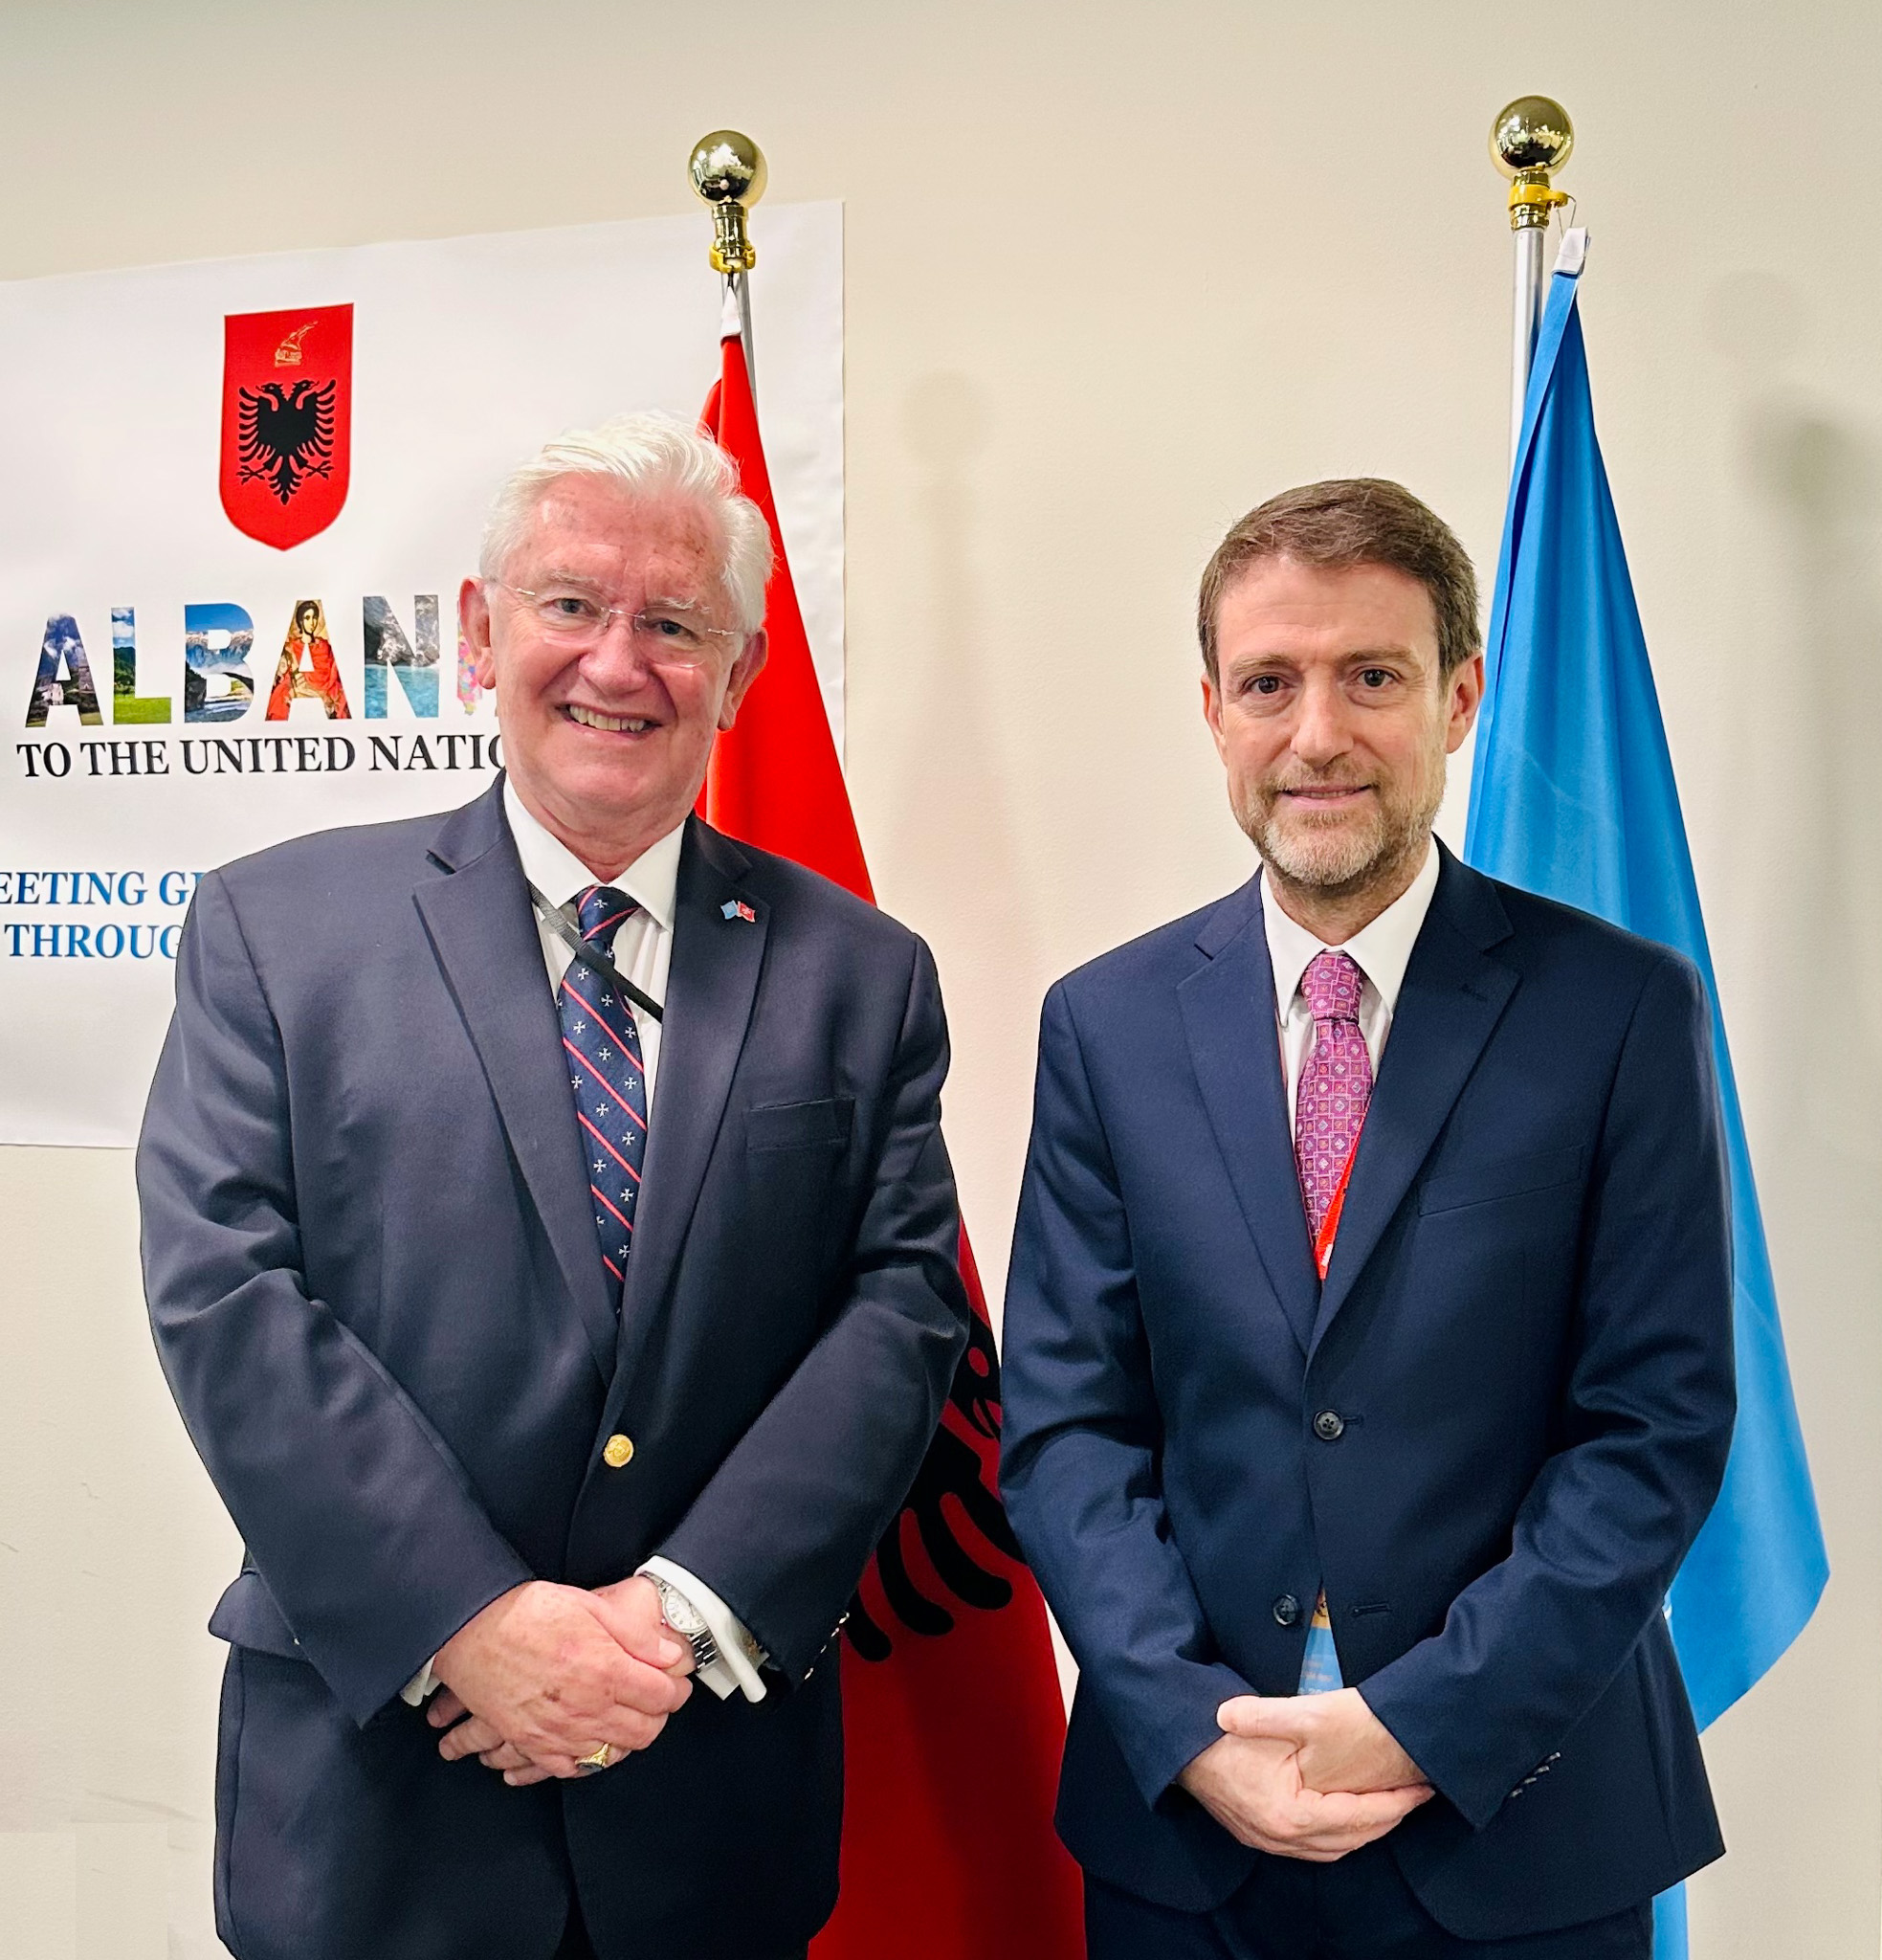 H.E. Ambassador Beresford-Hill met with H.E. Ambassador Mr. Ferit Hoxha, the Permanent Representative of the Republic of Albania to the United Nations in New York City, on July 3rd, 2023.